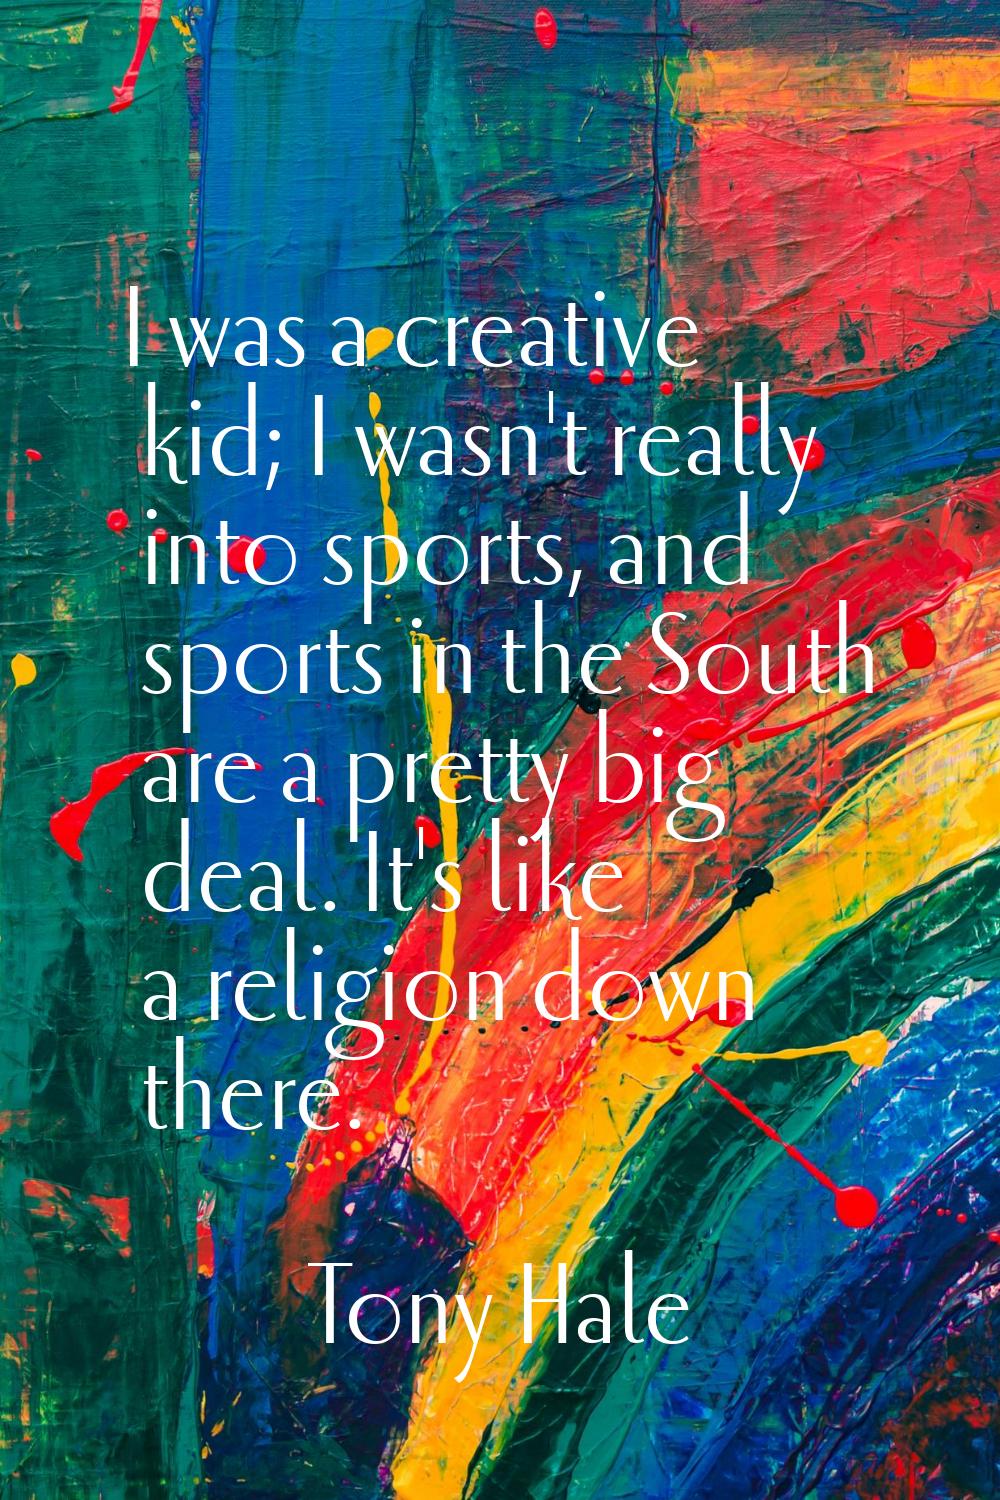 I was a creative kid; I wasn't really into sports, and sports in the South are a pretty big deal. I